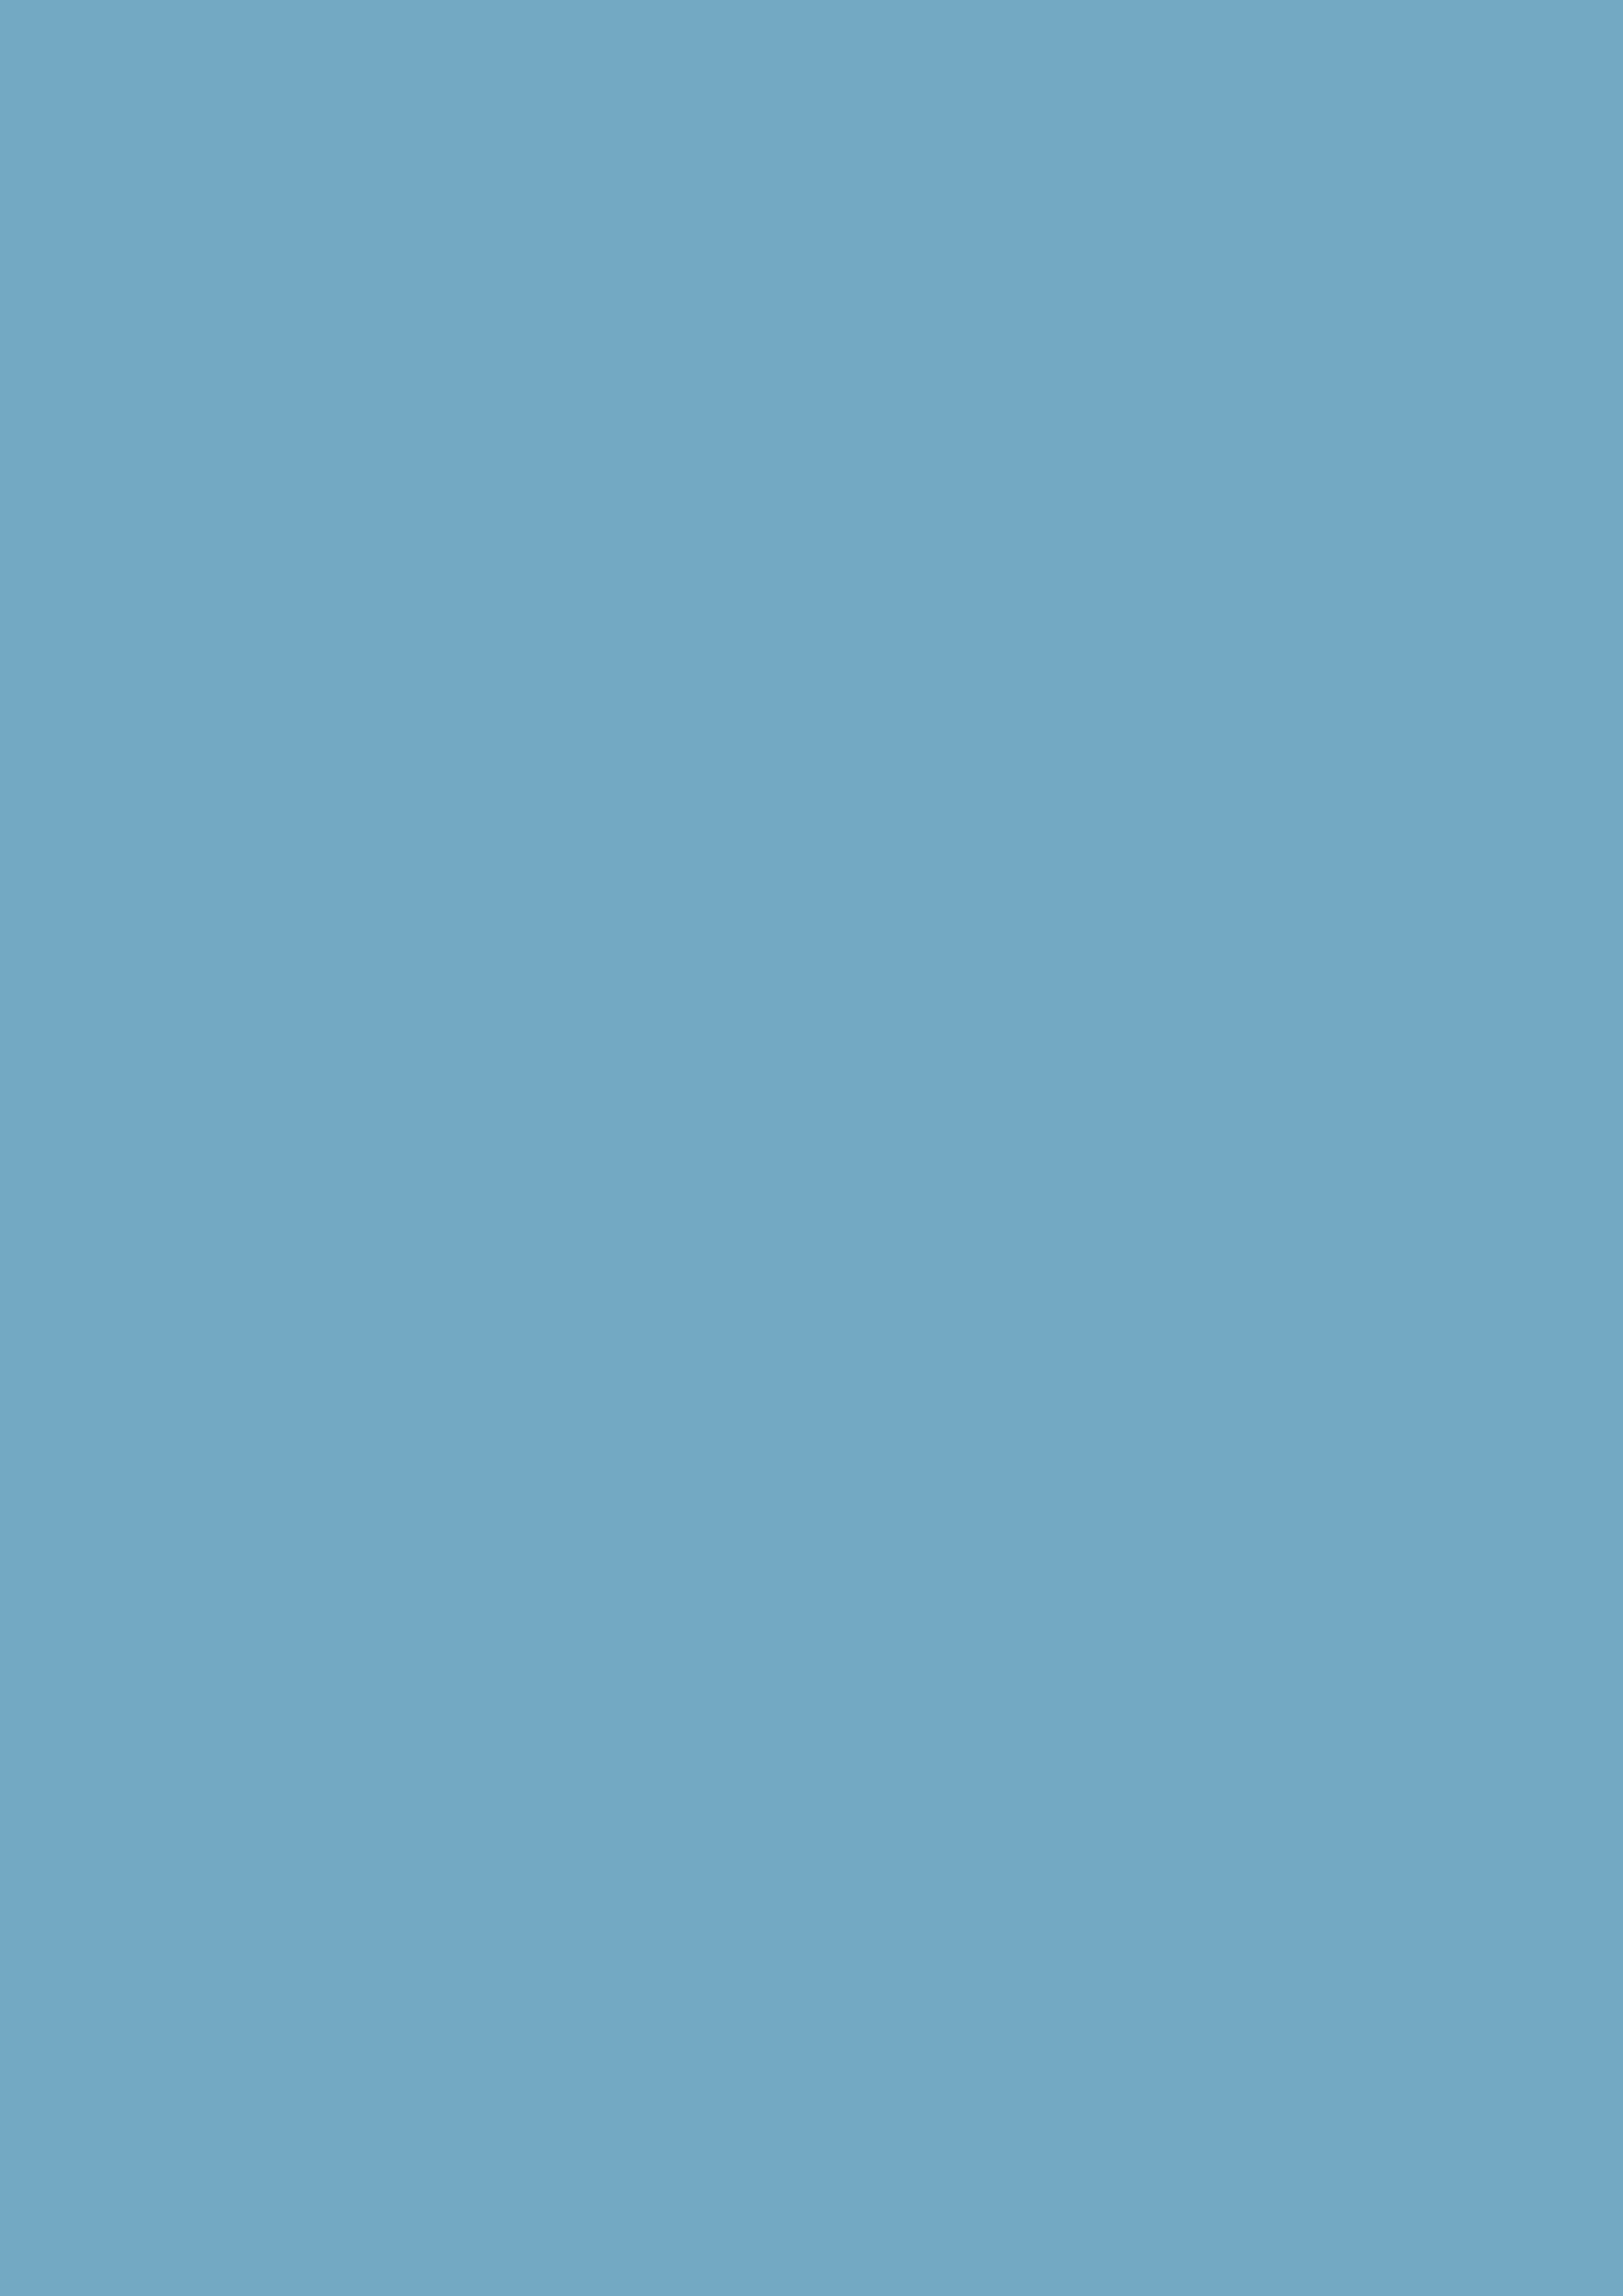 2480x3508 Moonstone Blue Solid Color Background